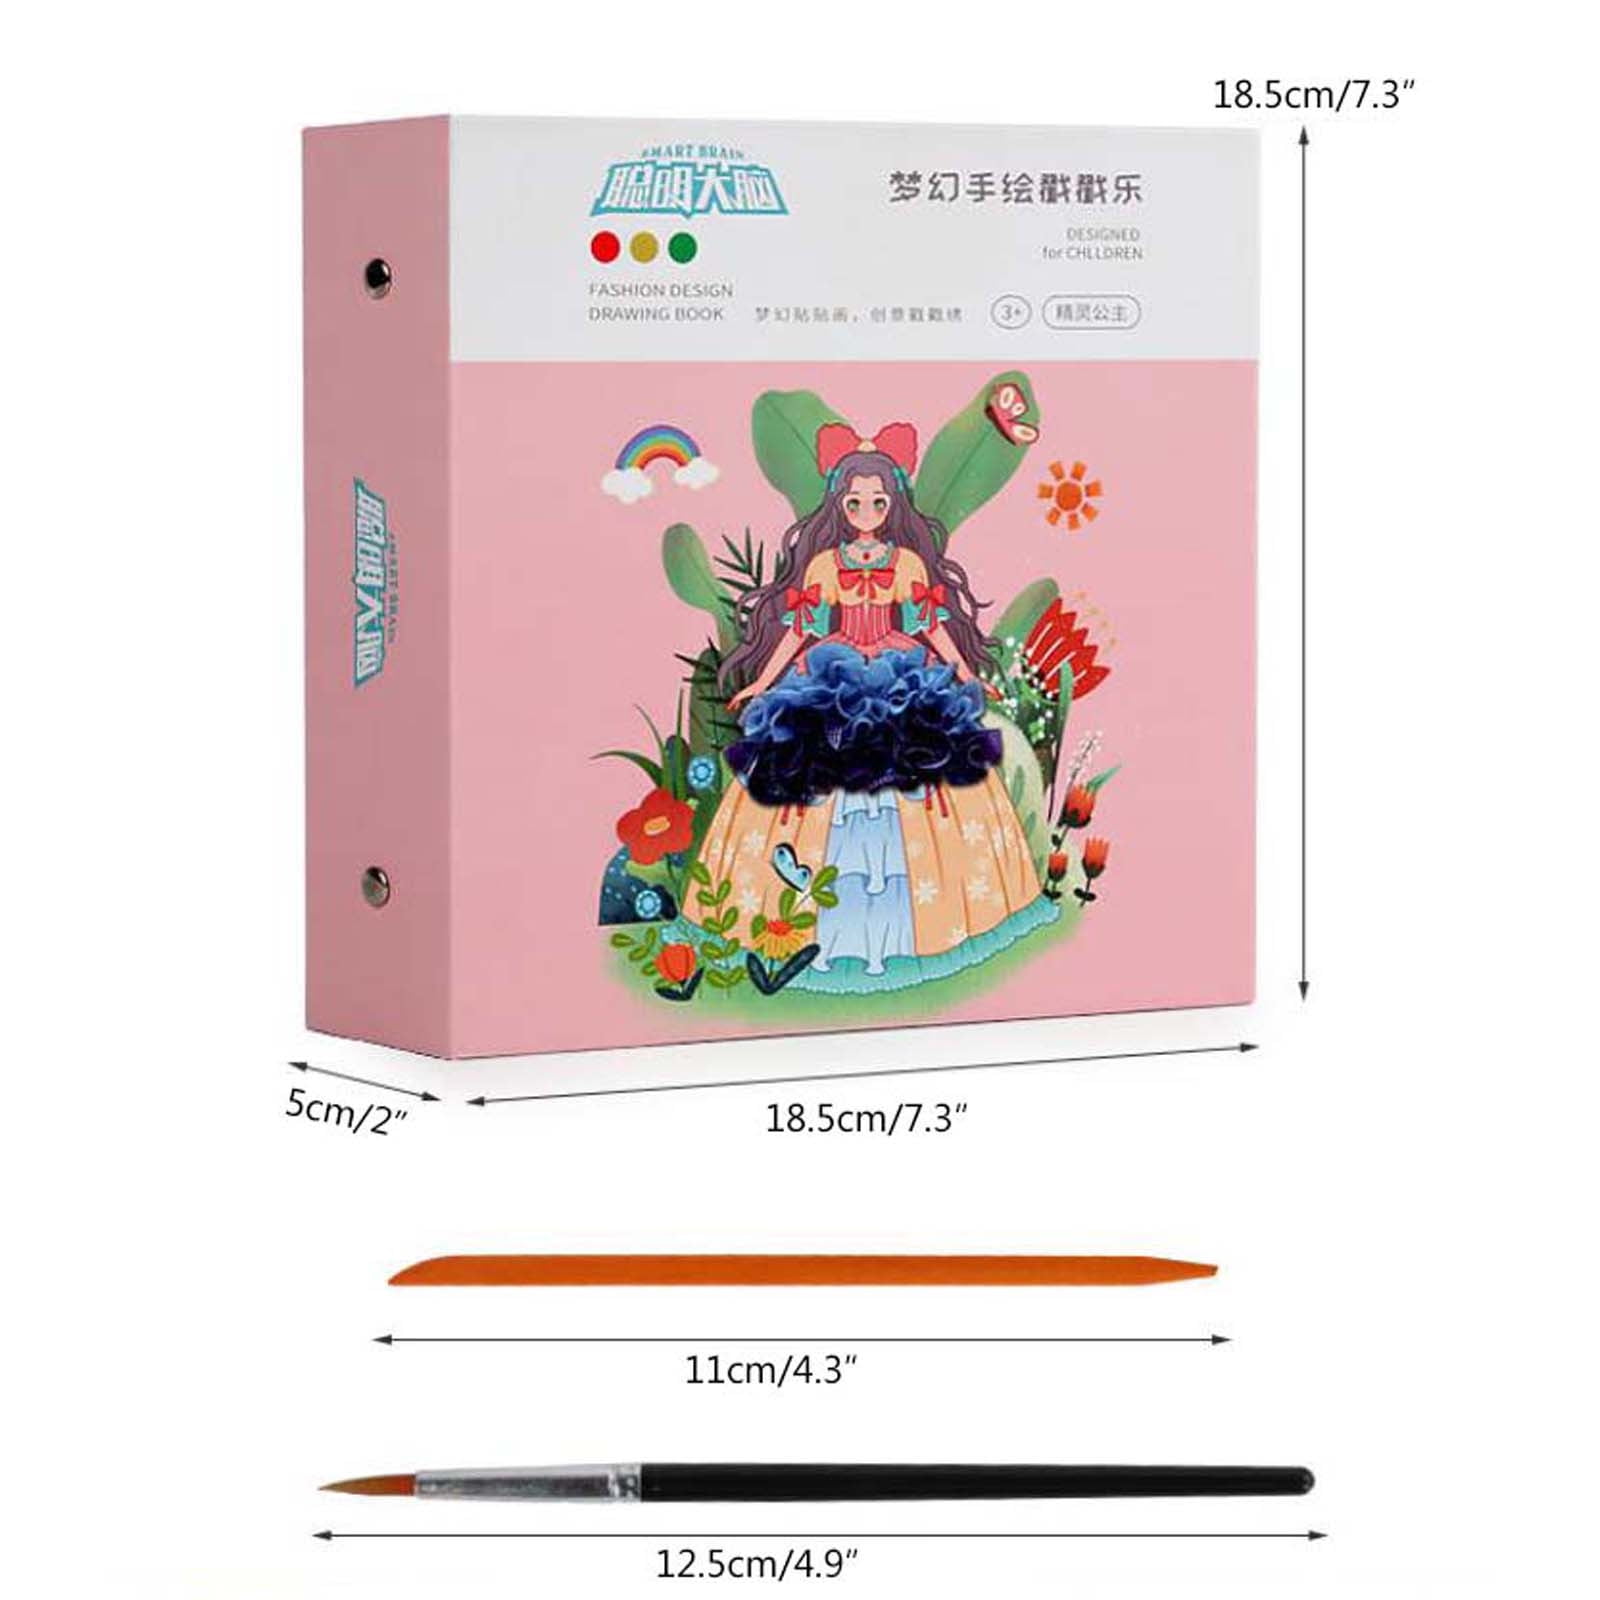 4Pcs Fantasy Princess C Kid Toy Fashion Drawing Creative Poke Art Book For Girls  Ages 8-12, Puzzle Puncture Painting With Princess Board Stickers, Kids Art  Education Book, Art Diy Craft Kit Gifts